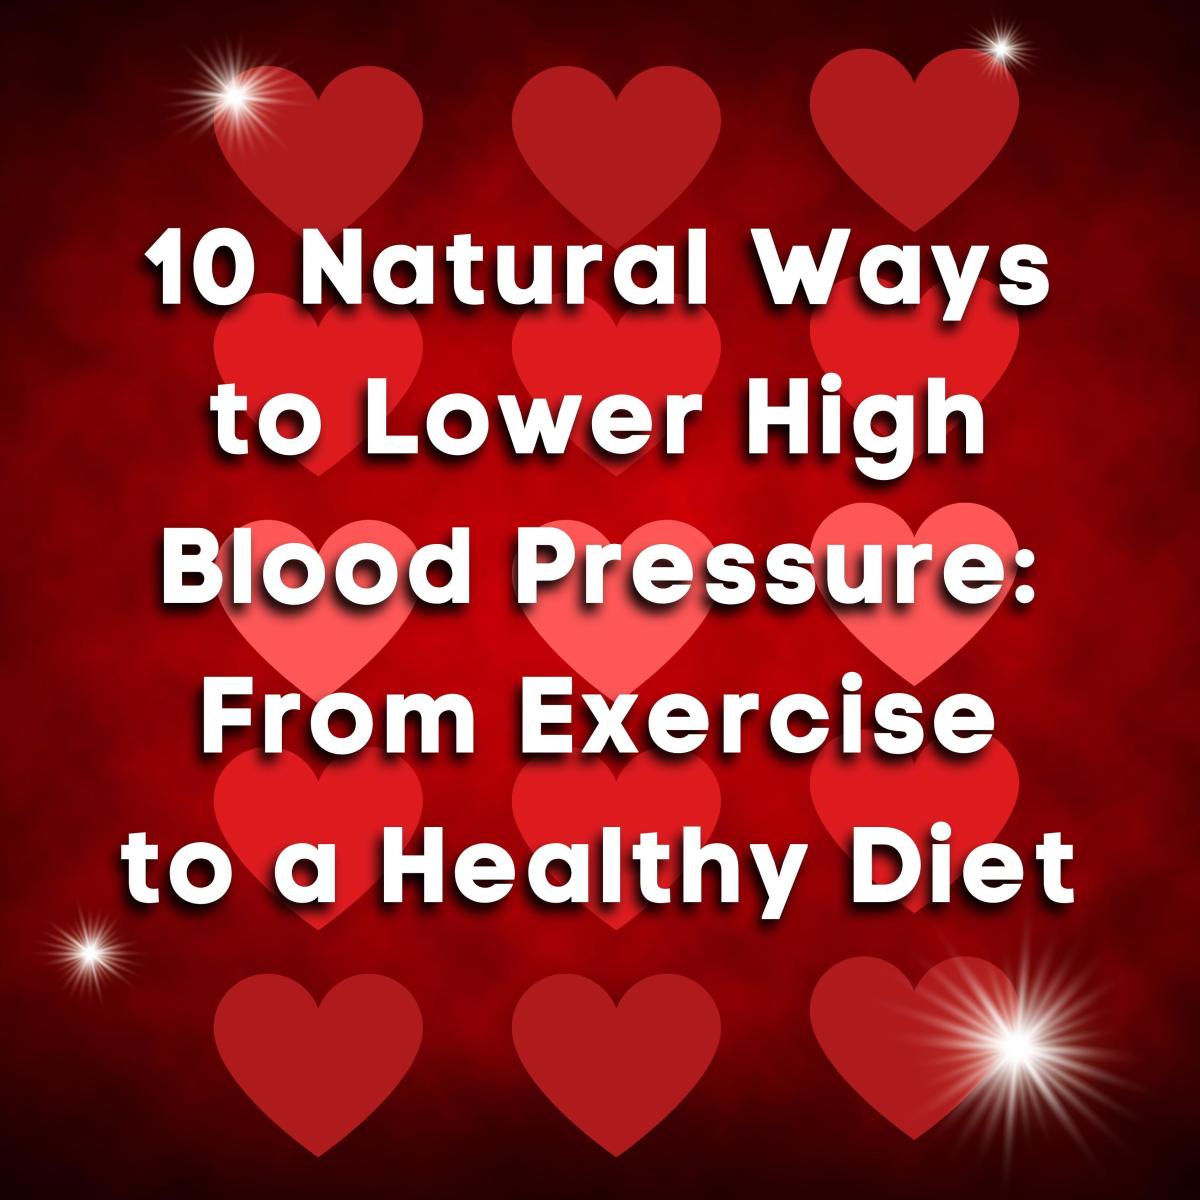 10 Natural Ways to Lower High Blood Pressure: From Exercise to Healthy Diet